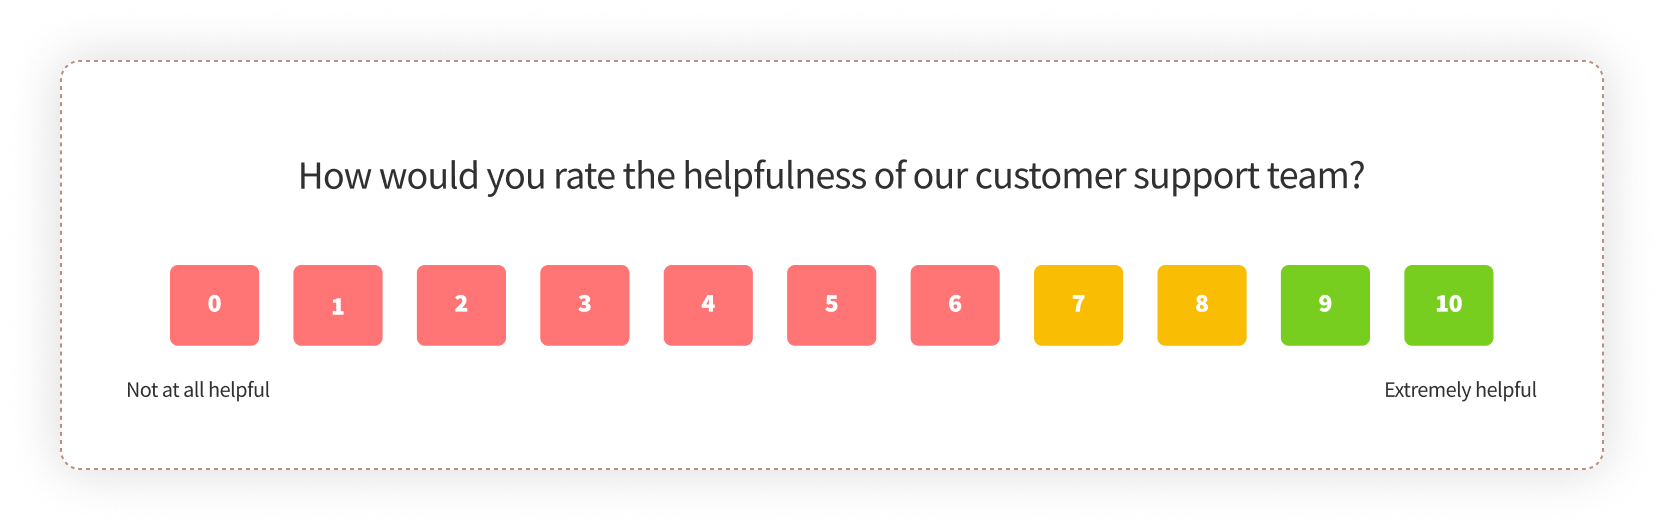 1 to 10 opinion scale question for customer support interaction